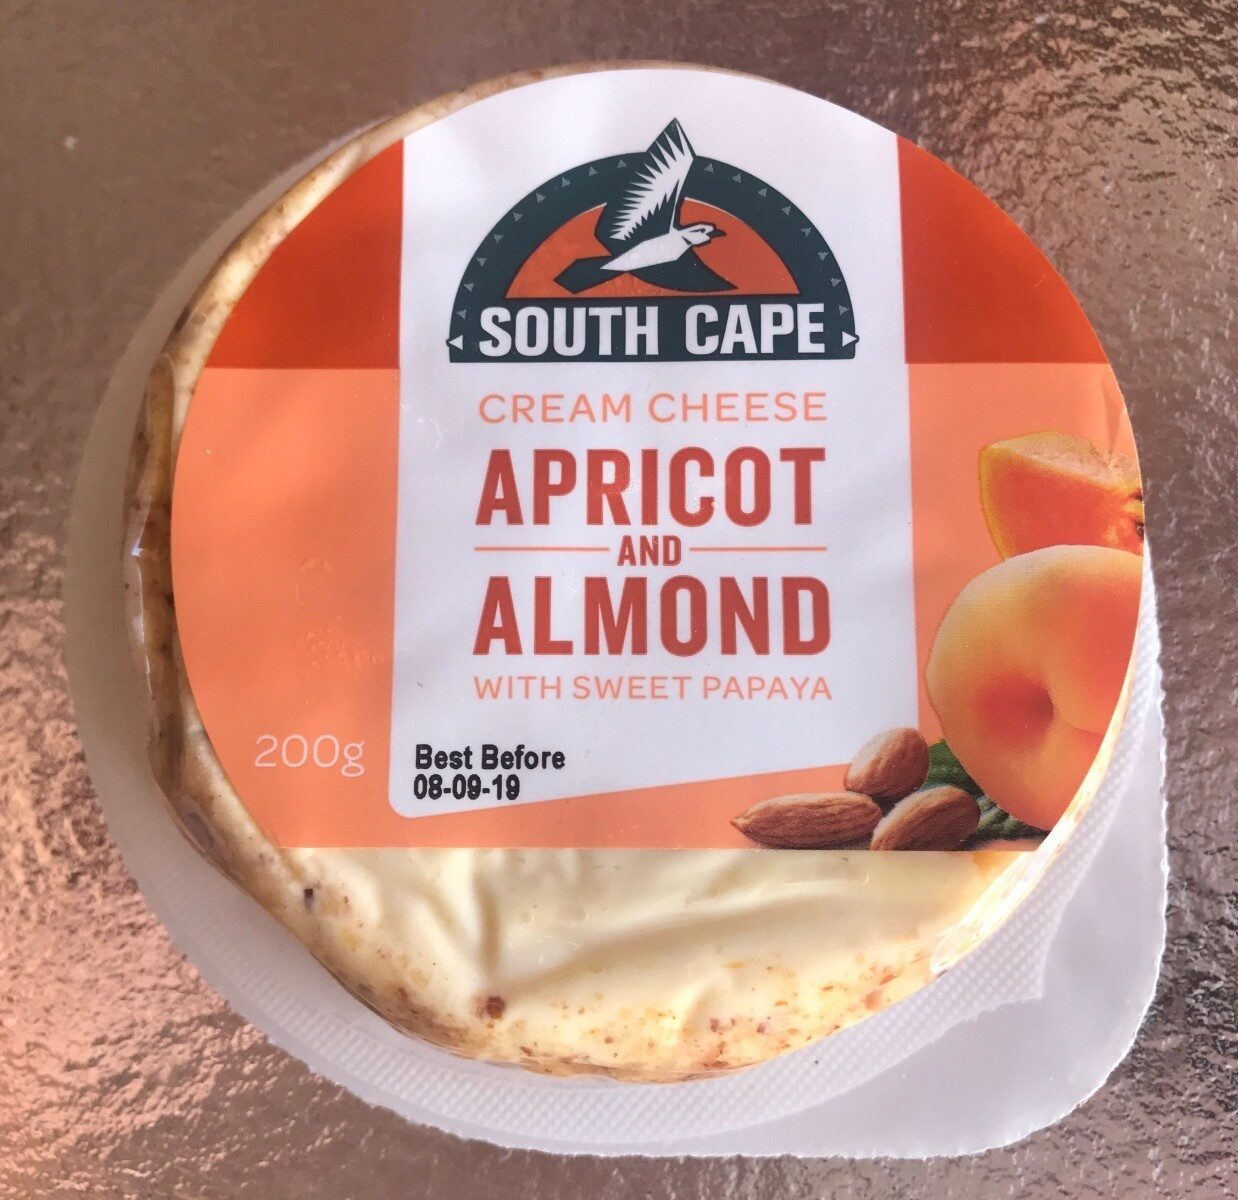 Cream cheese apricot and almond - Nutrition facts